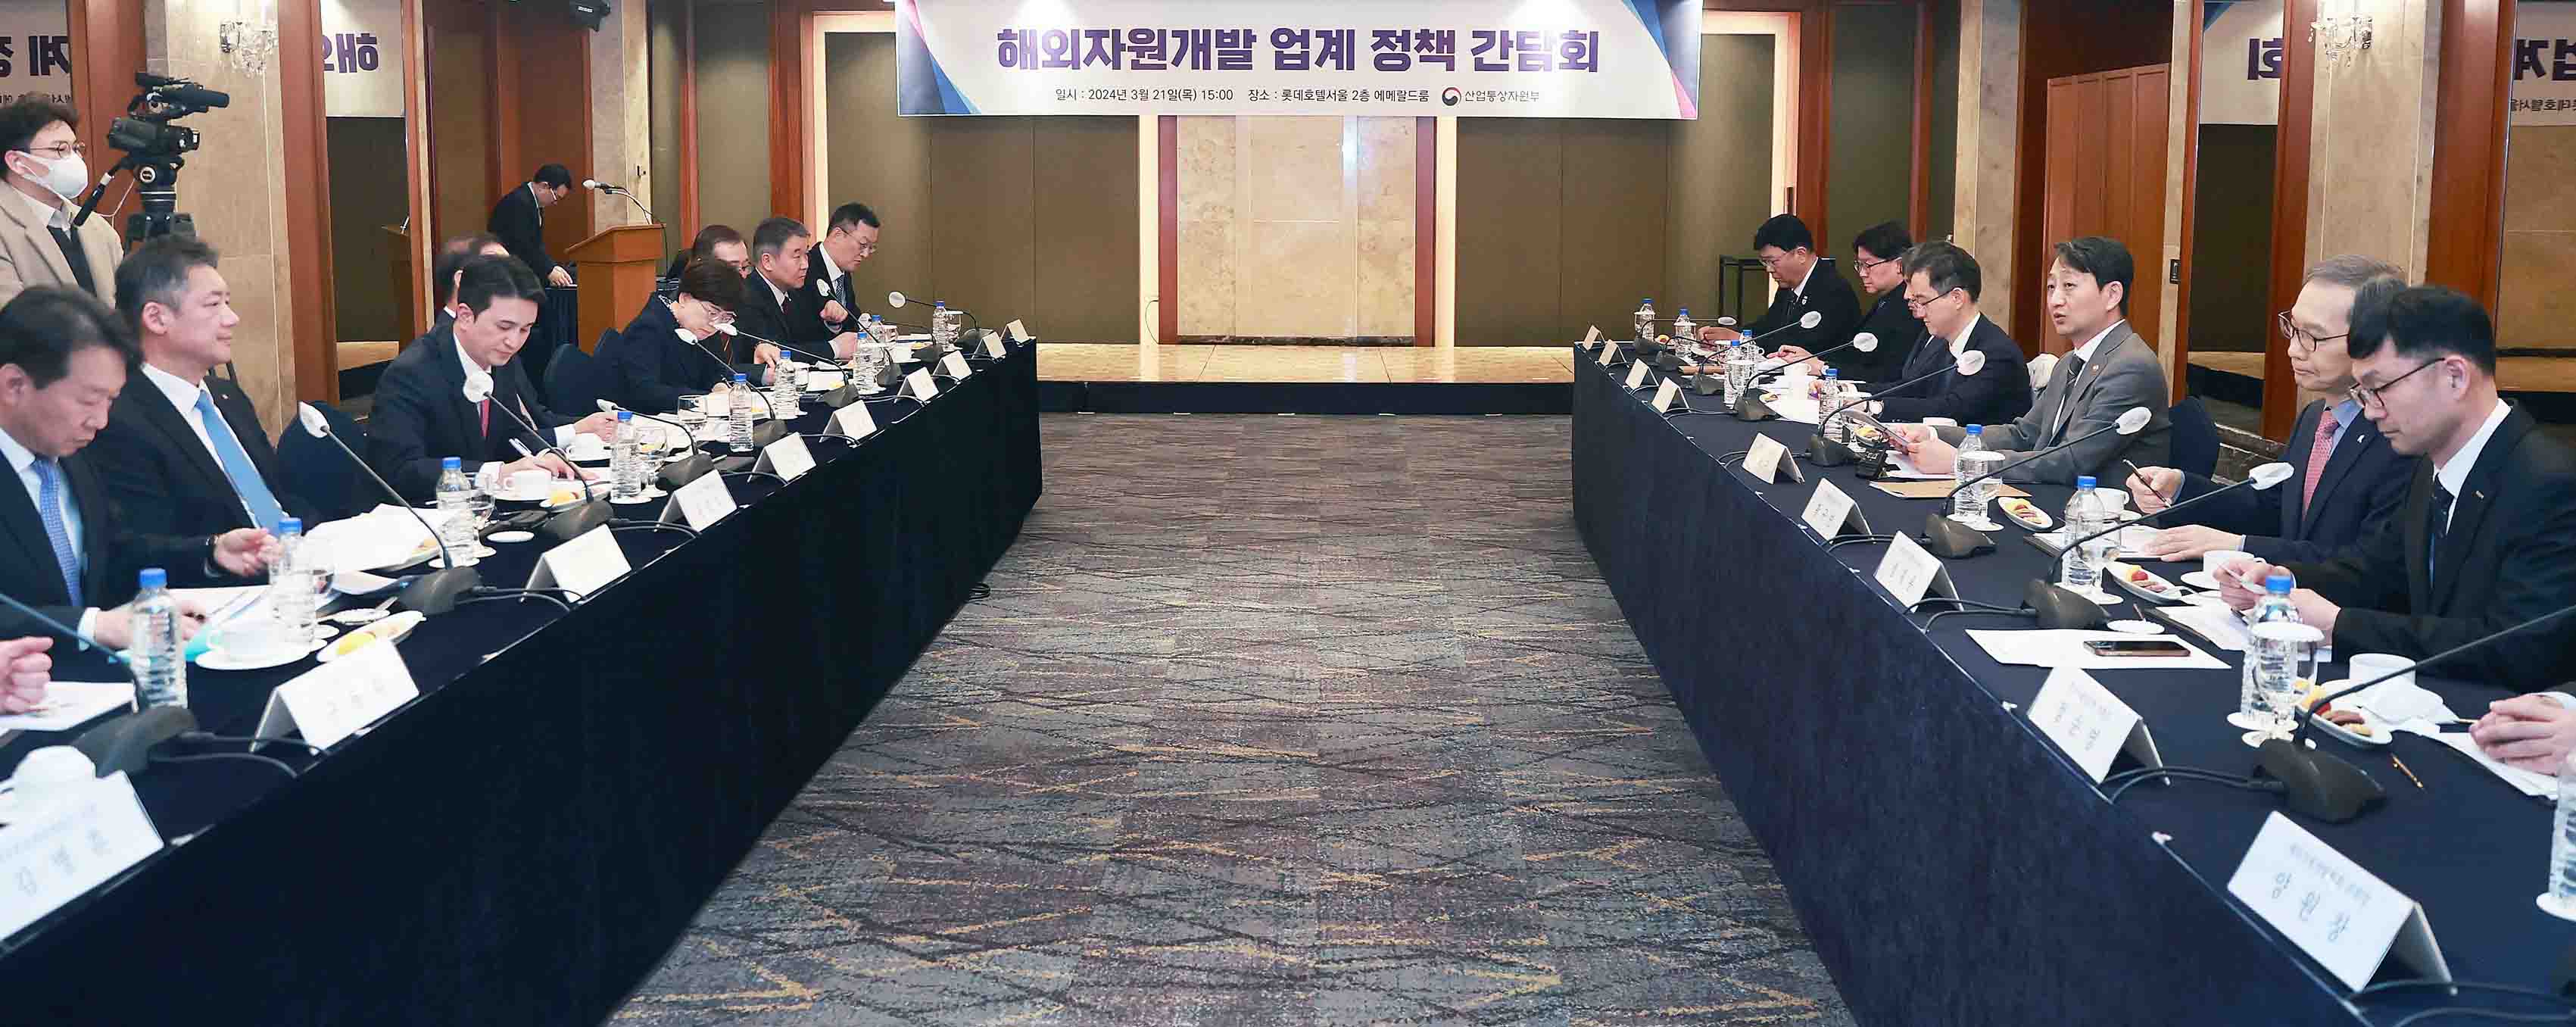 Minister Ahn chairs conference on overseas resources development